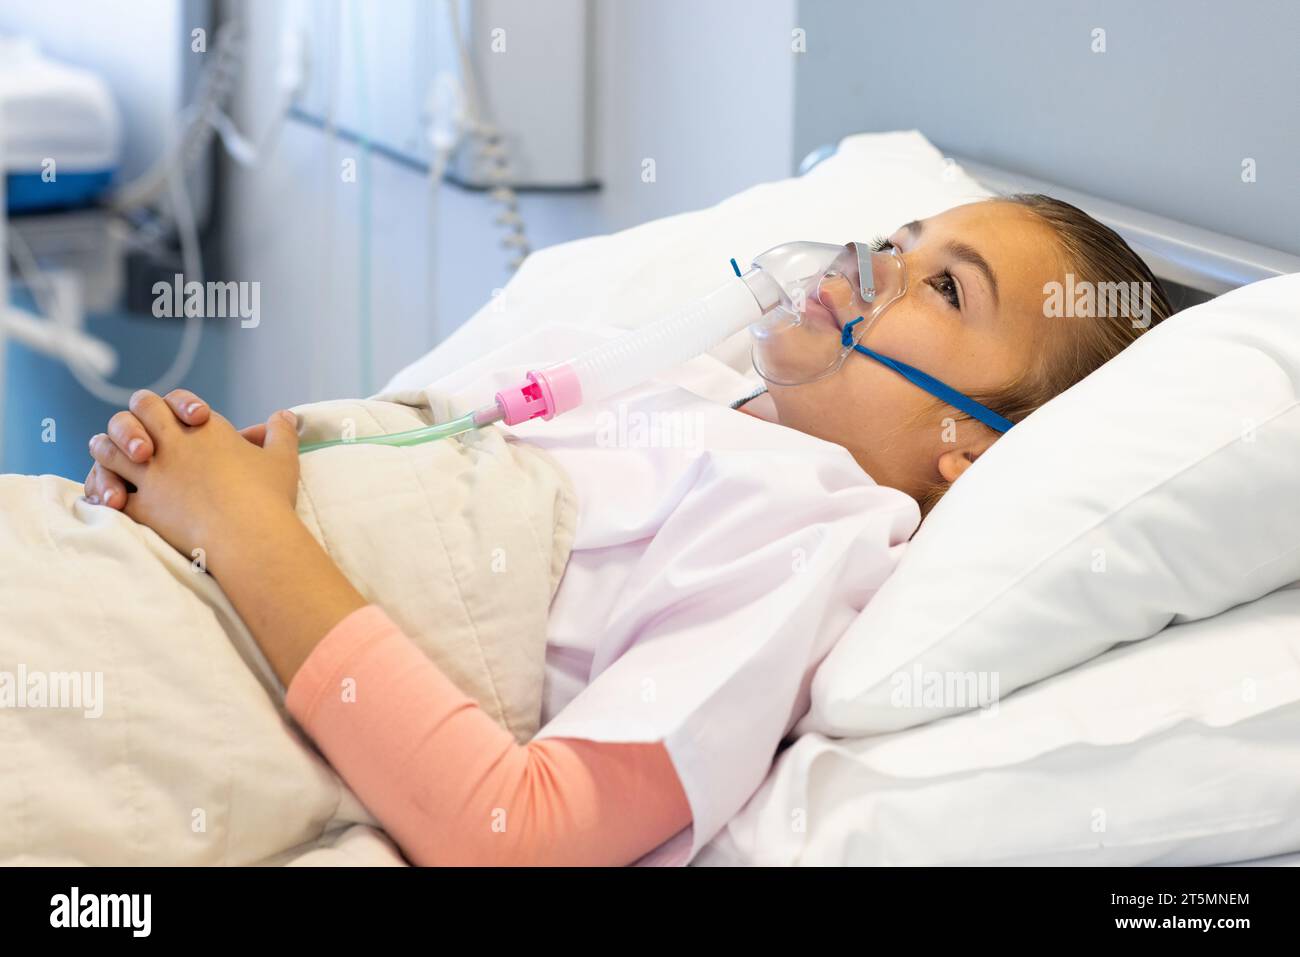 Caucasian girl patient in oxygen mask lying in hospital bed Stock Photo